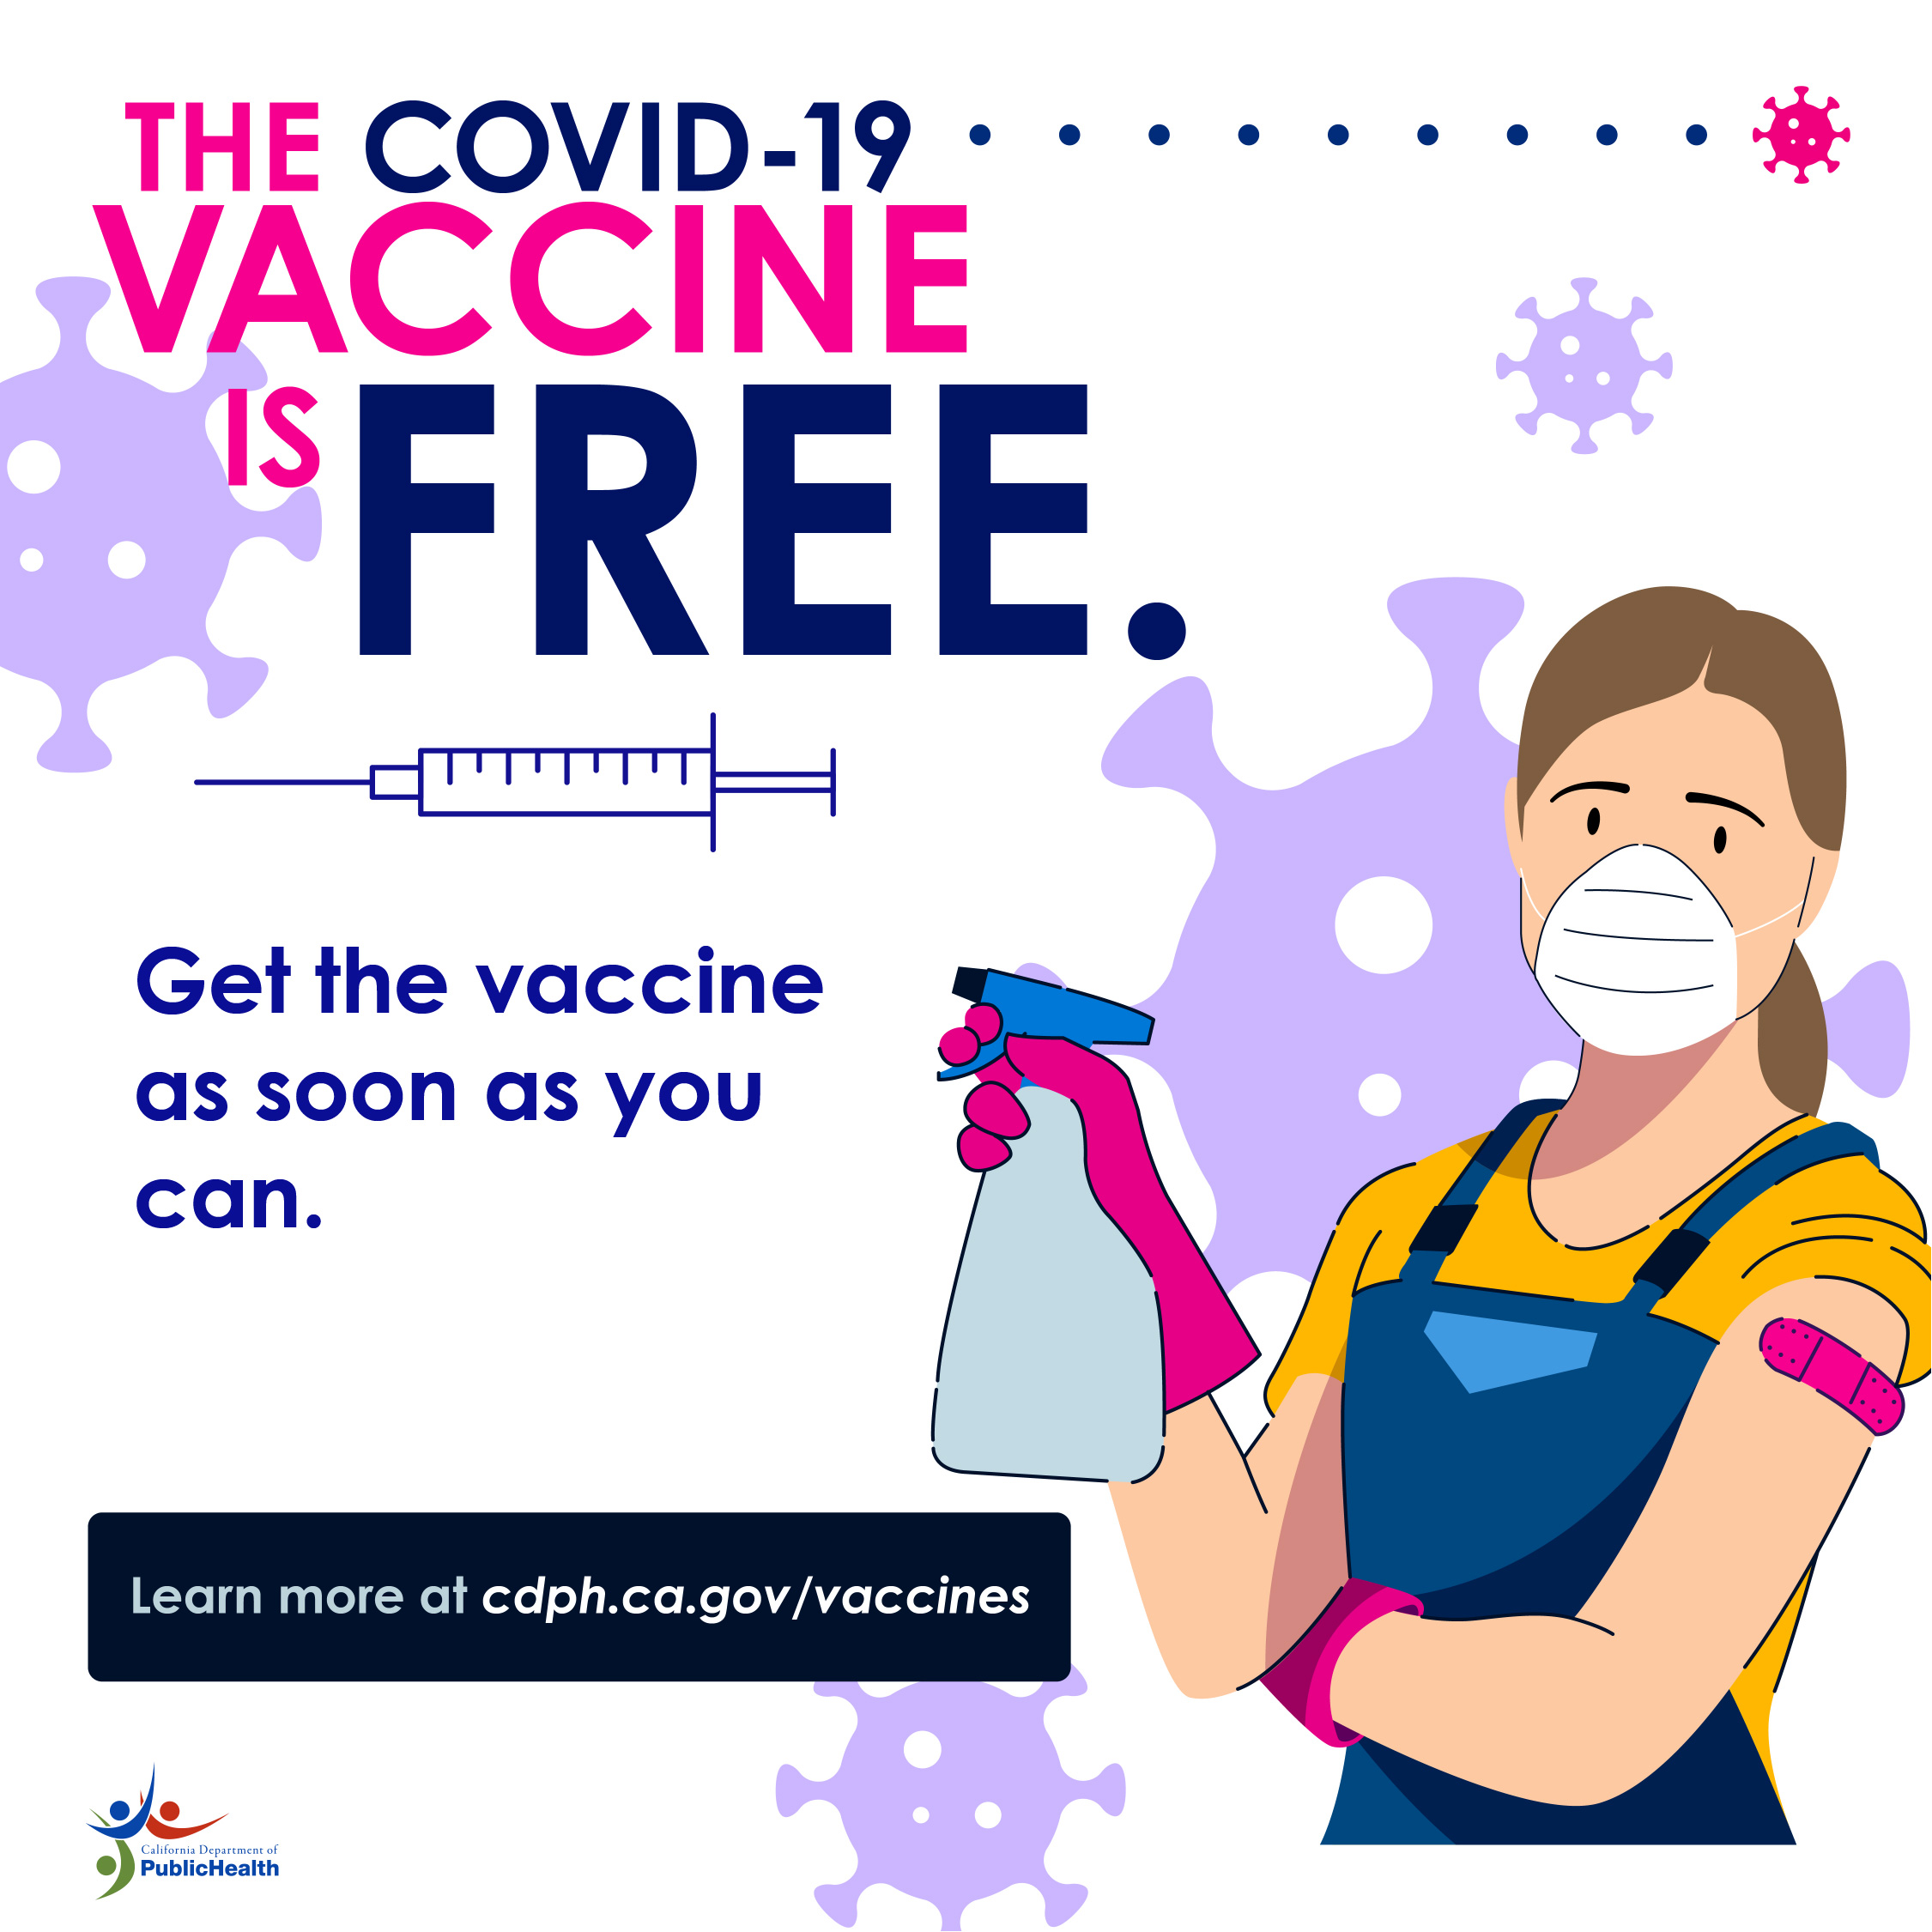 Woman with bandage on arm. Text: The COVID-19 vaccine is free. Find out when it’s your turn and get it as soon as you can…